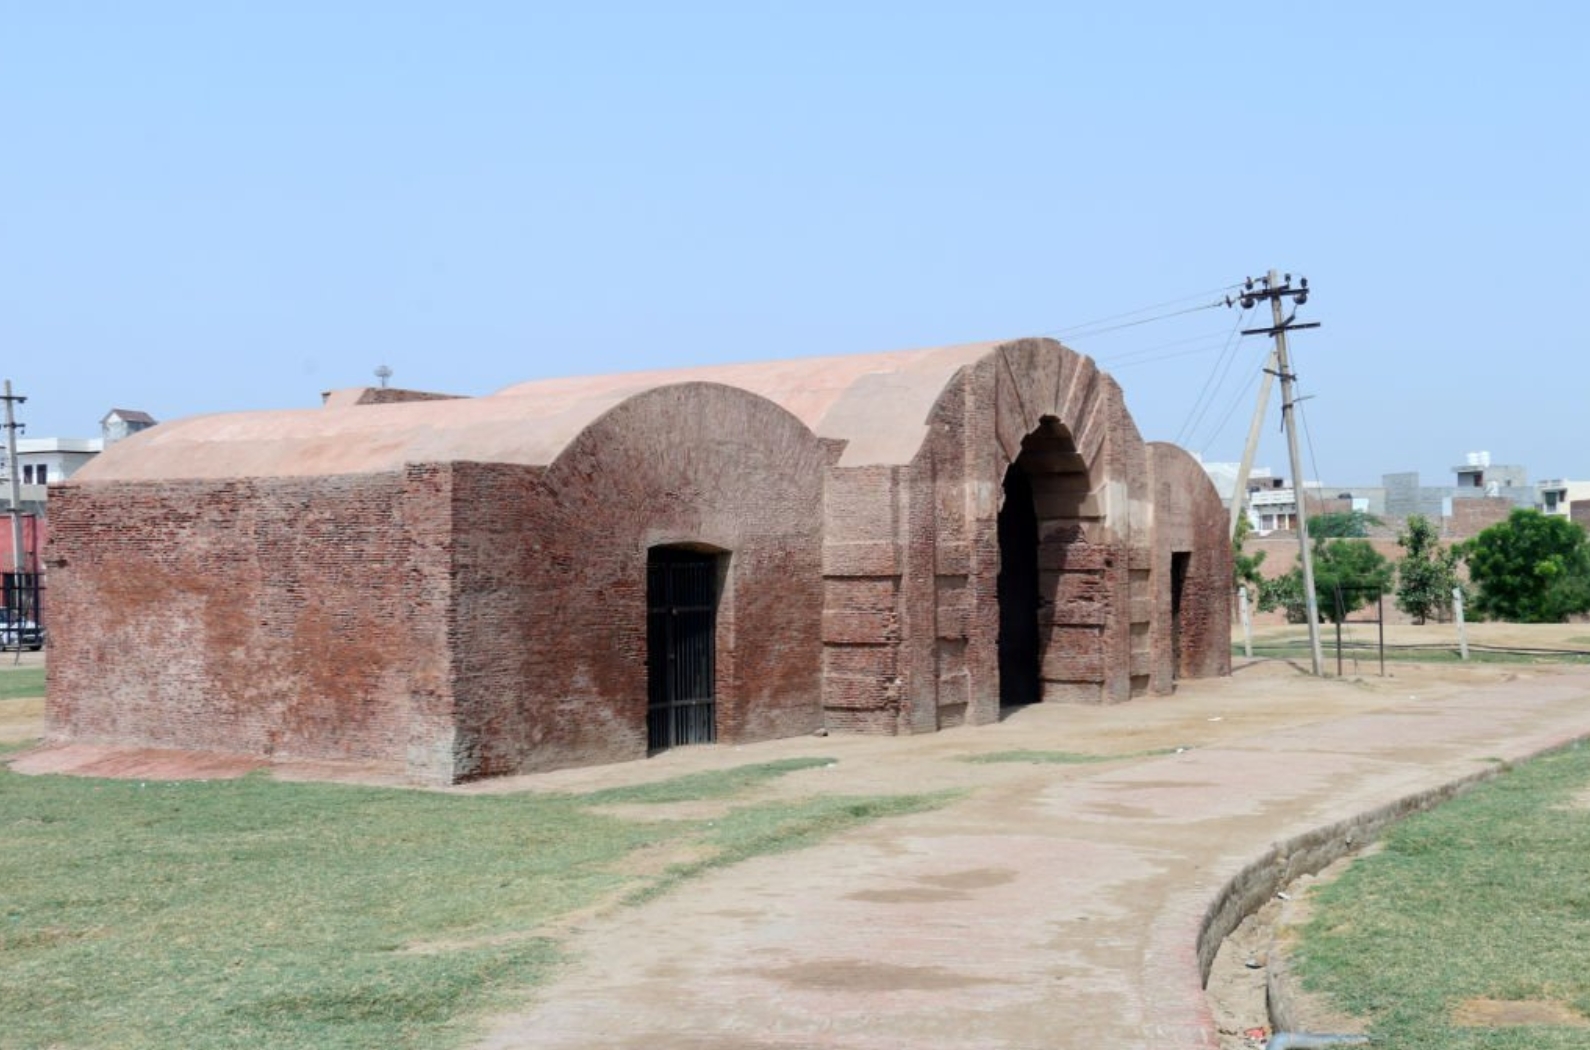 Main Entry Pont of Asigarh Fort in Hansi built by Prithviraj Chauhan in 12th Centaury at Hansi city of Hisar district in Haryana State of India.